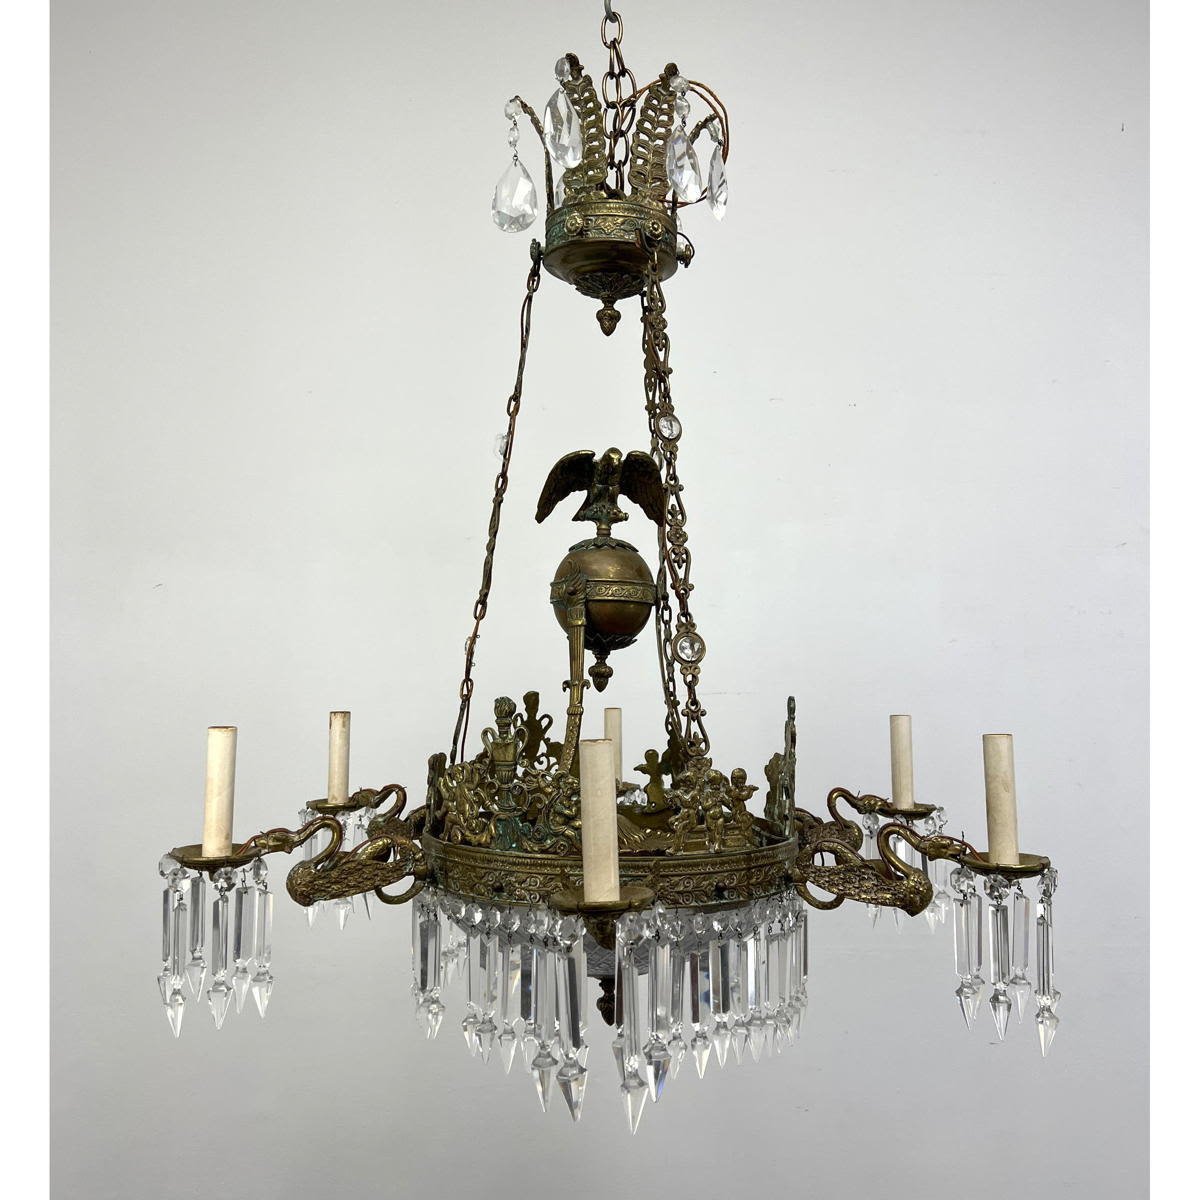 French Empire style Brass Chandelier.